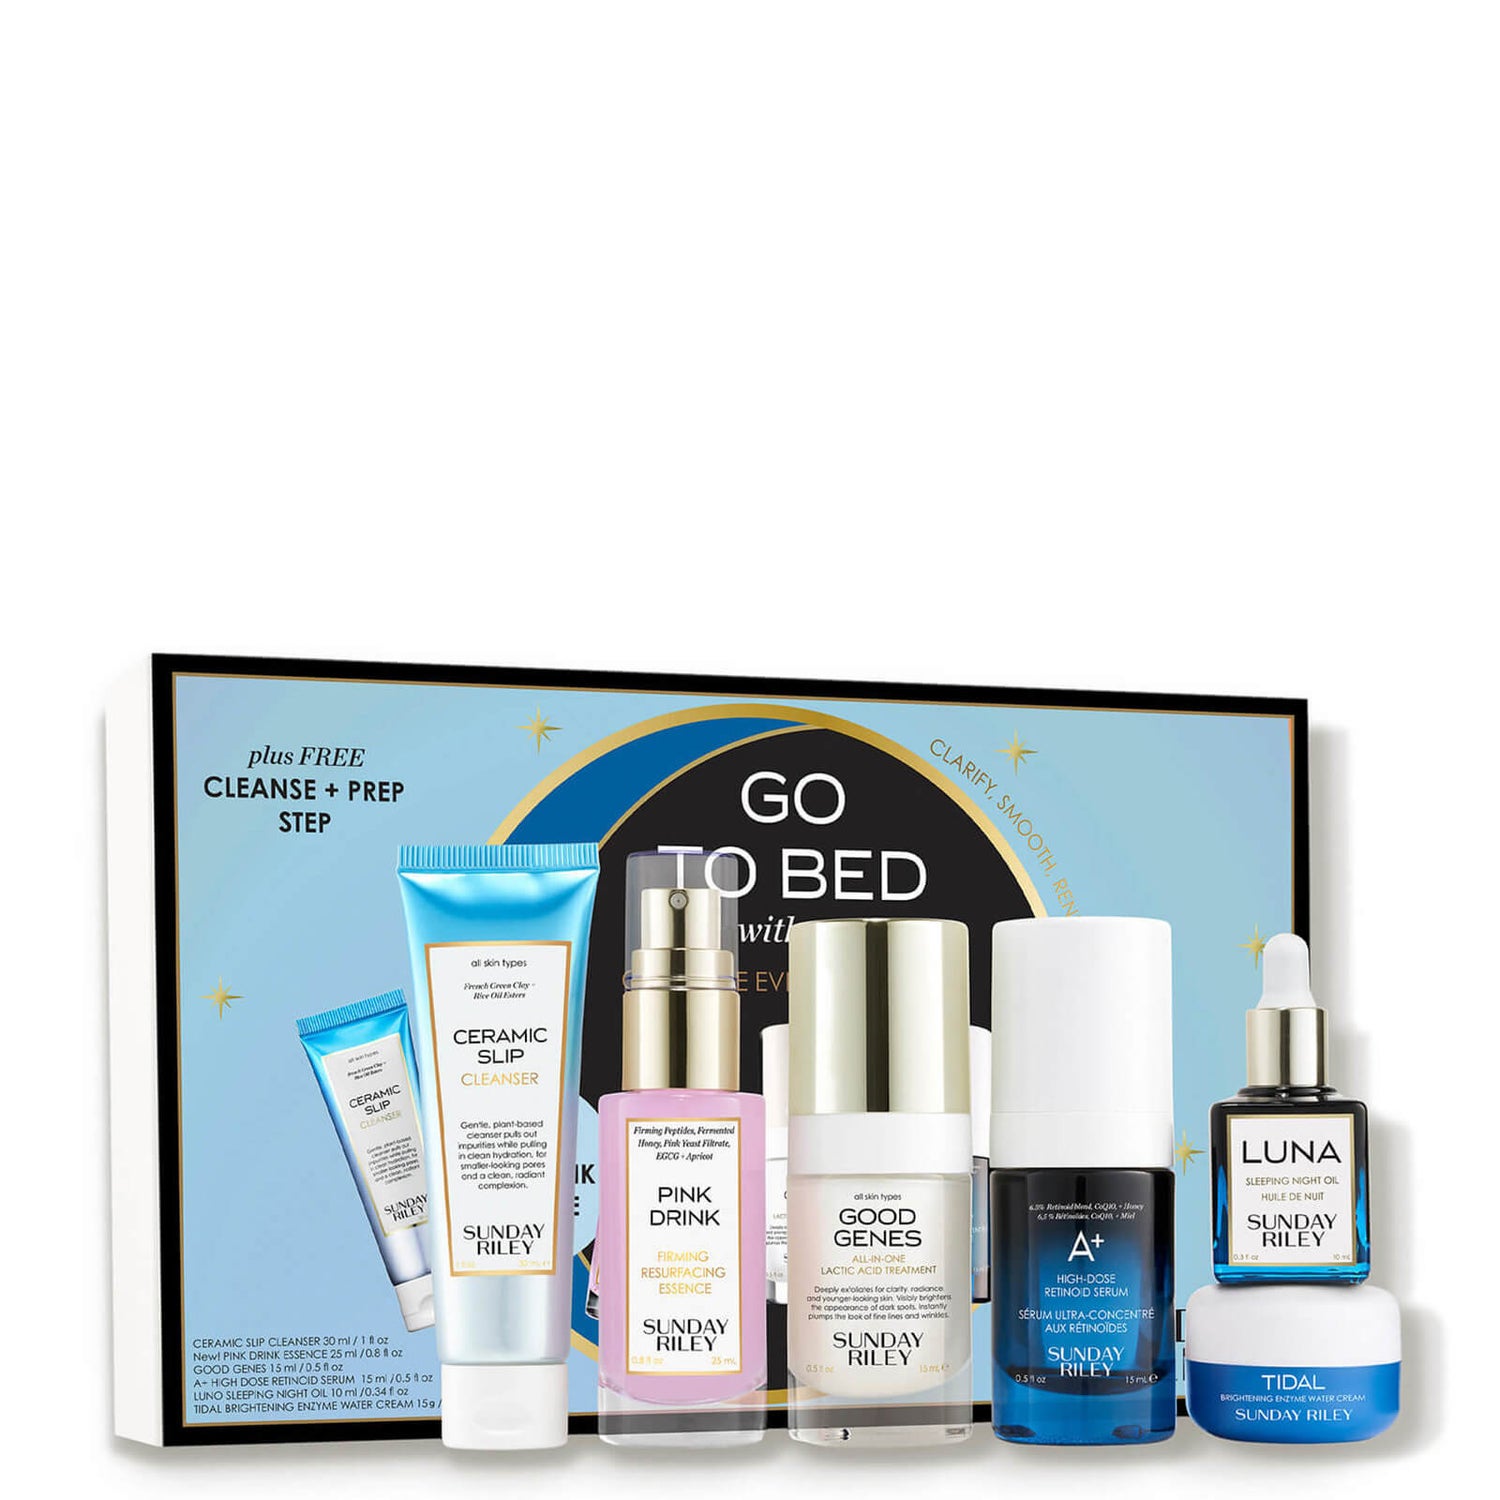 Sunday Riley Go to Bed with Me Complete Anti-Aging Night Routine (Worth $155.00)